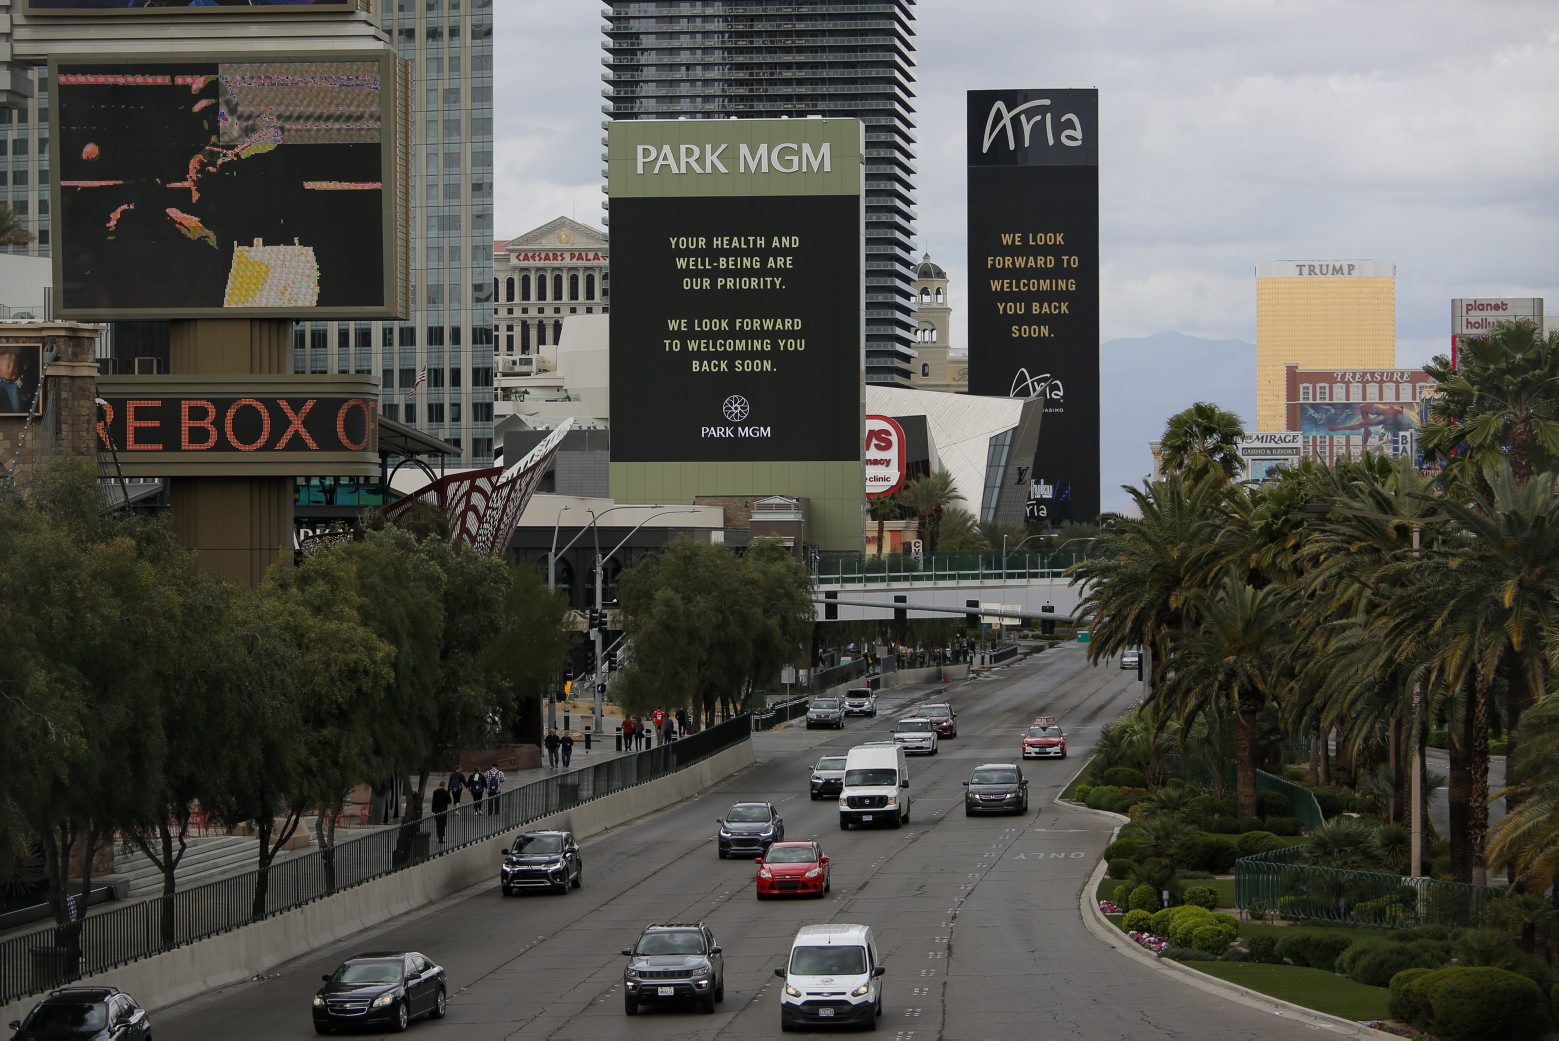 The Park MGM and Aria hotel-casinos flash messages on their closing due to the coronavirus, Monday, March 16, 2020, in Las Vegas. MGM Resorts International and Wynn Resorts will close their Las Vegas properties as of March 17 in light of the coronavirus pandemic. (AP Photo/John Locher) Virus Outbreak Nevada